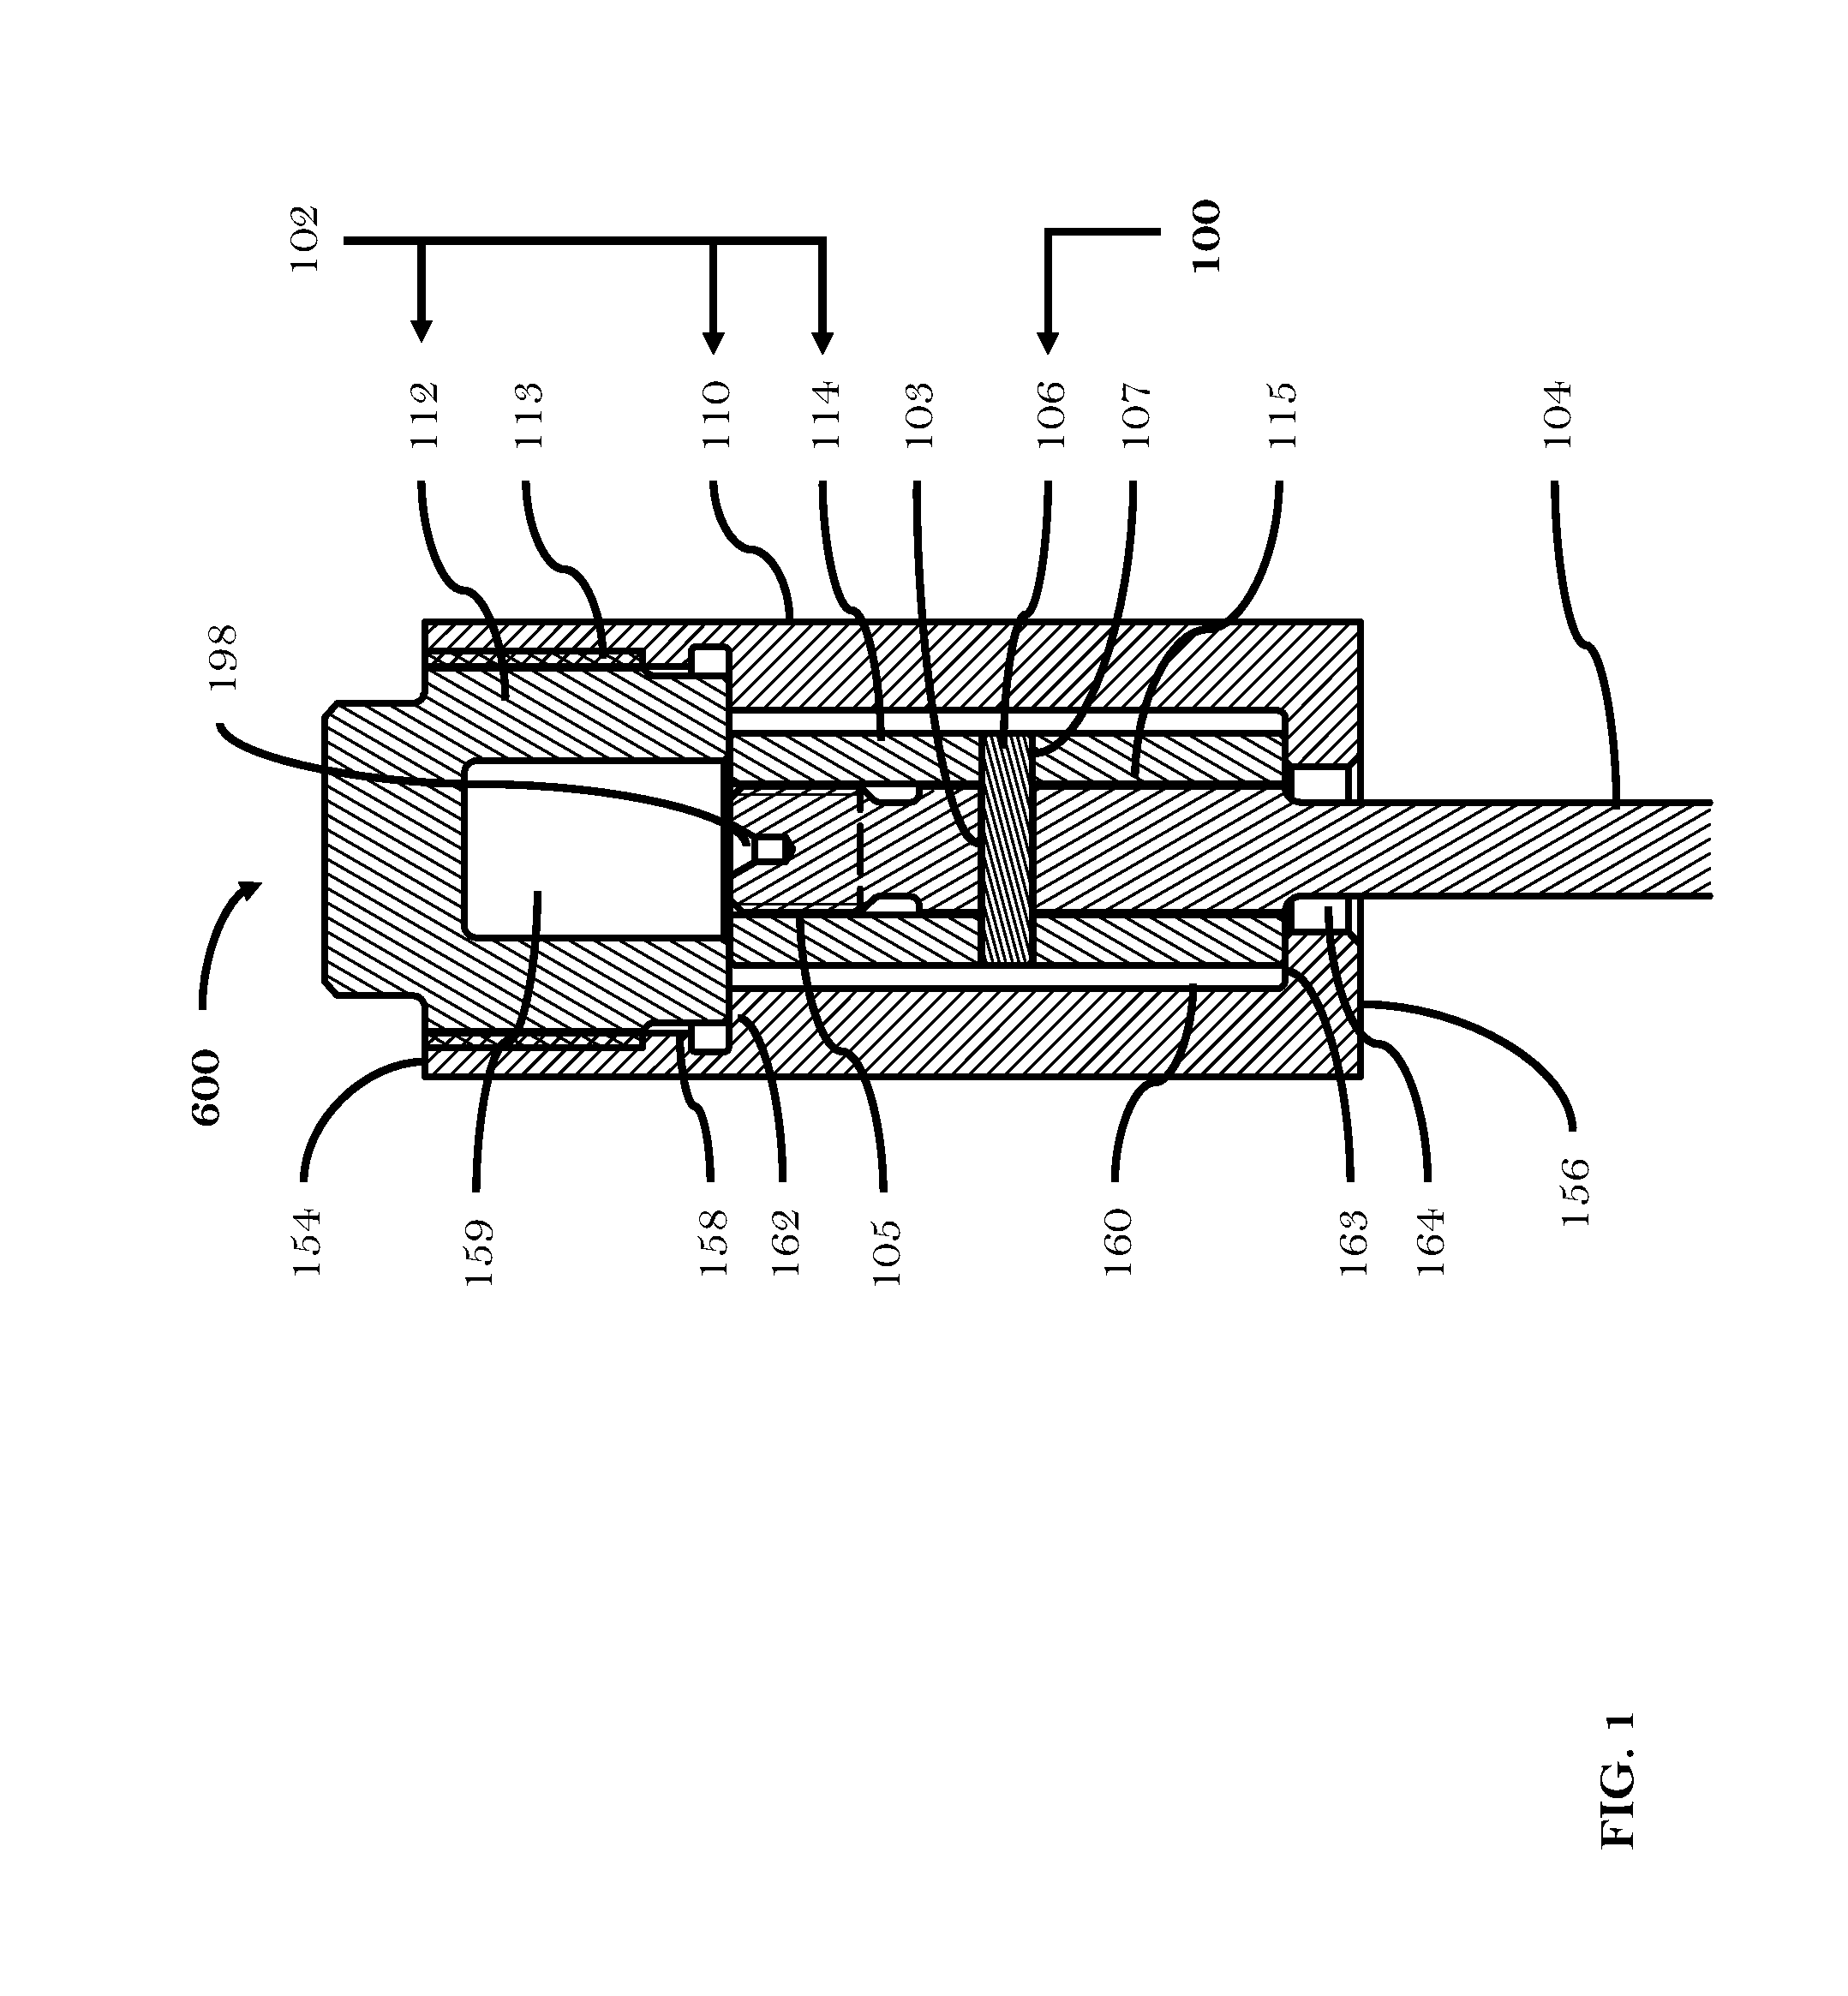 Safety connector for hot runner, having latch destructively interlocking valve stem with actuation plate